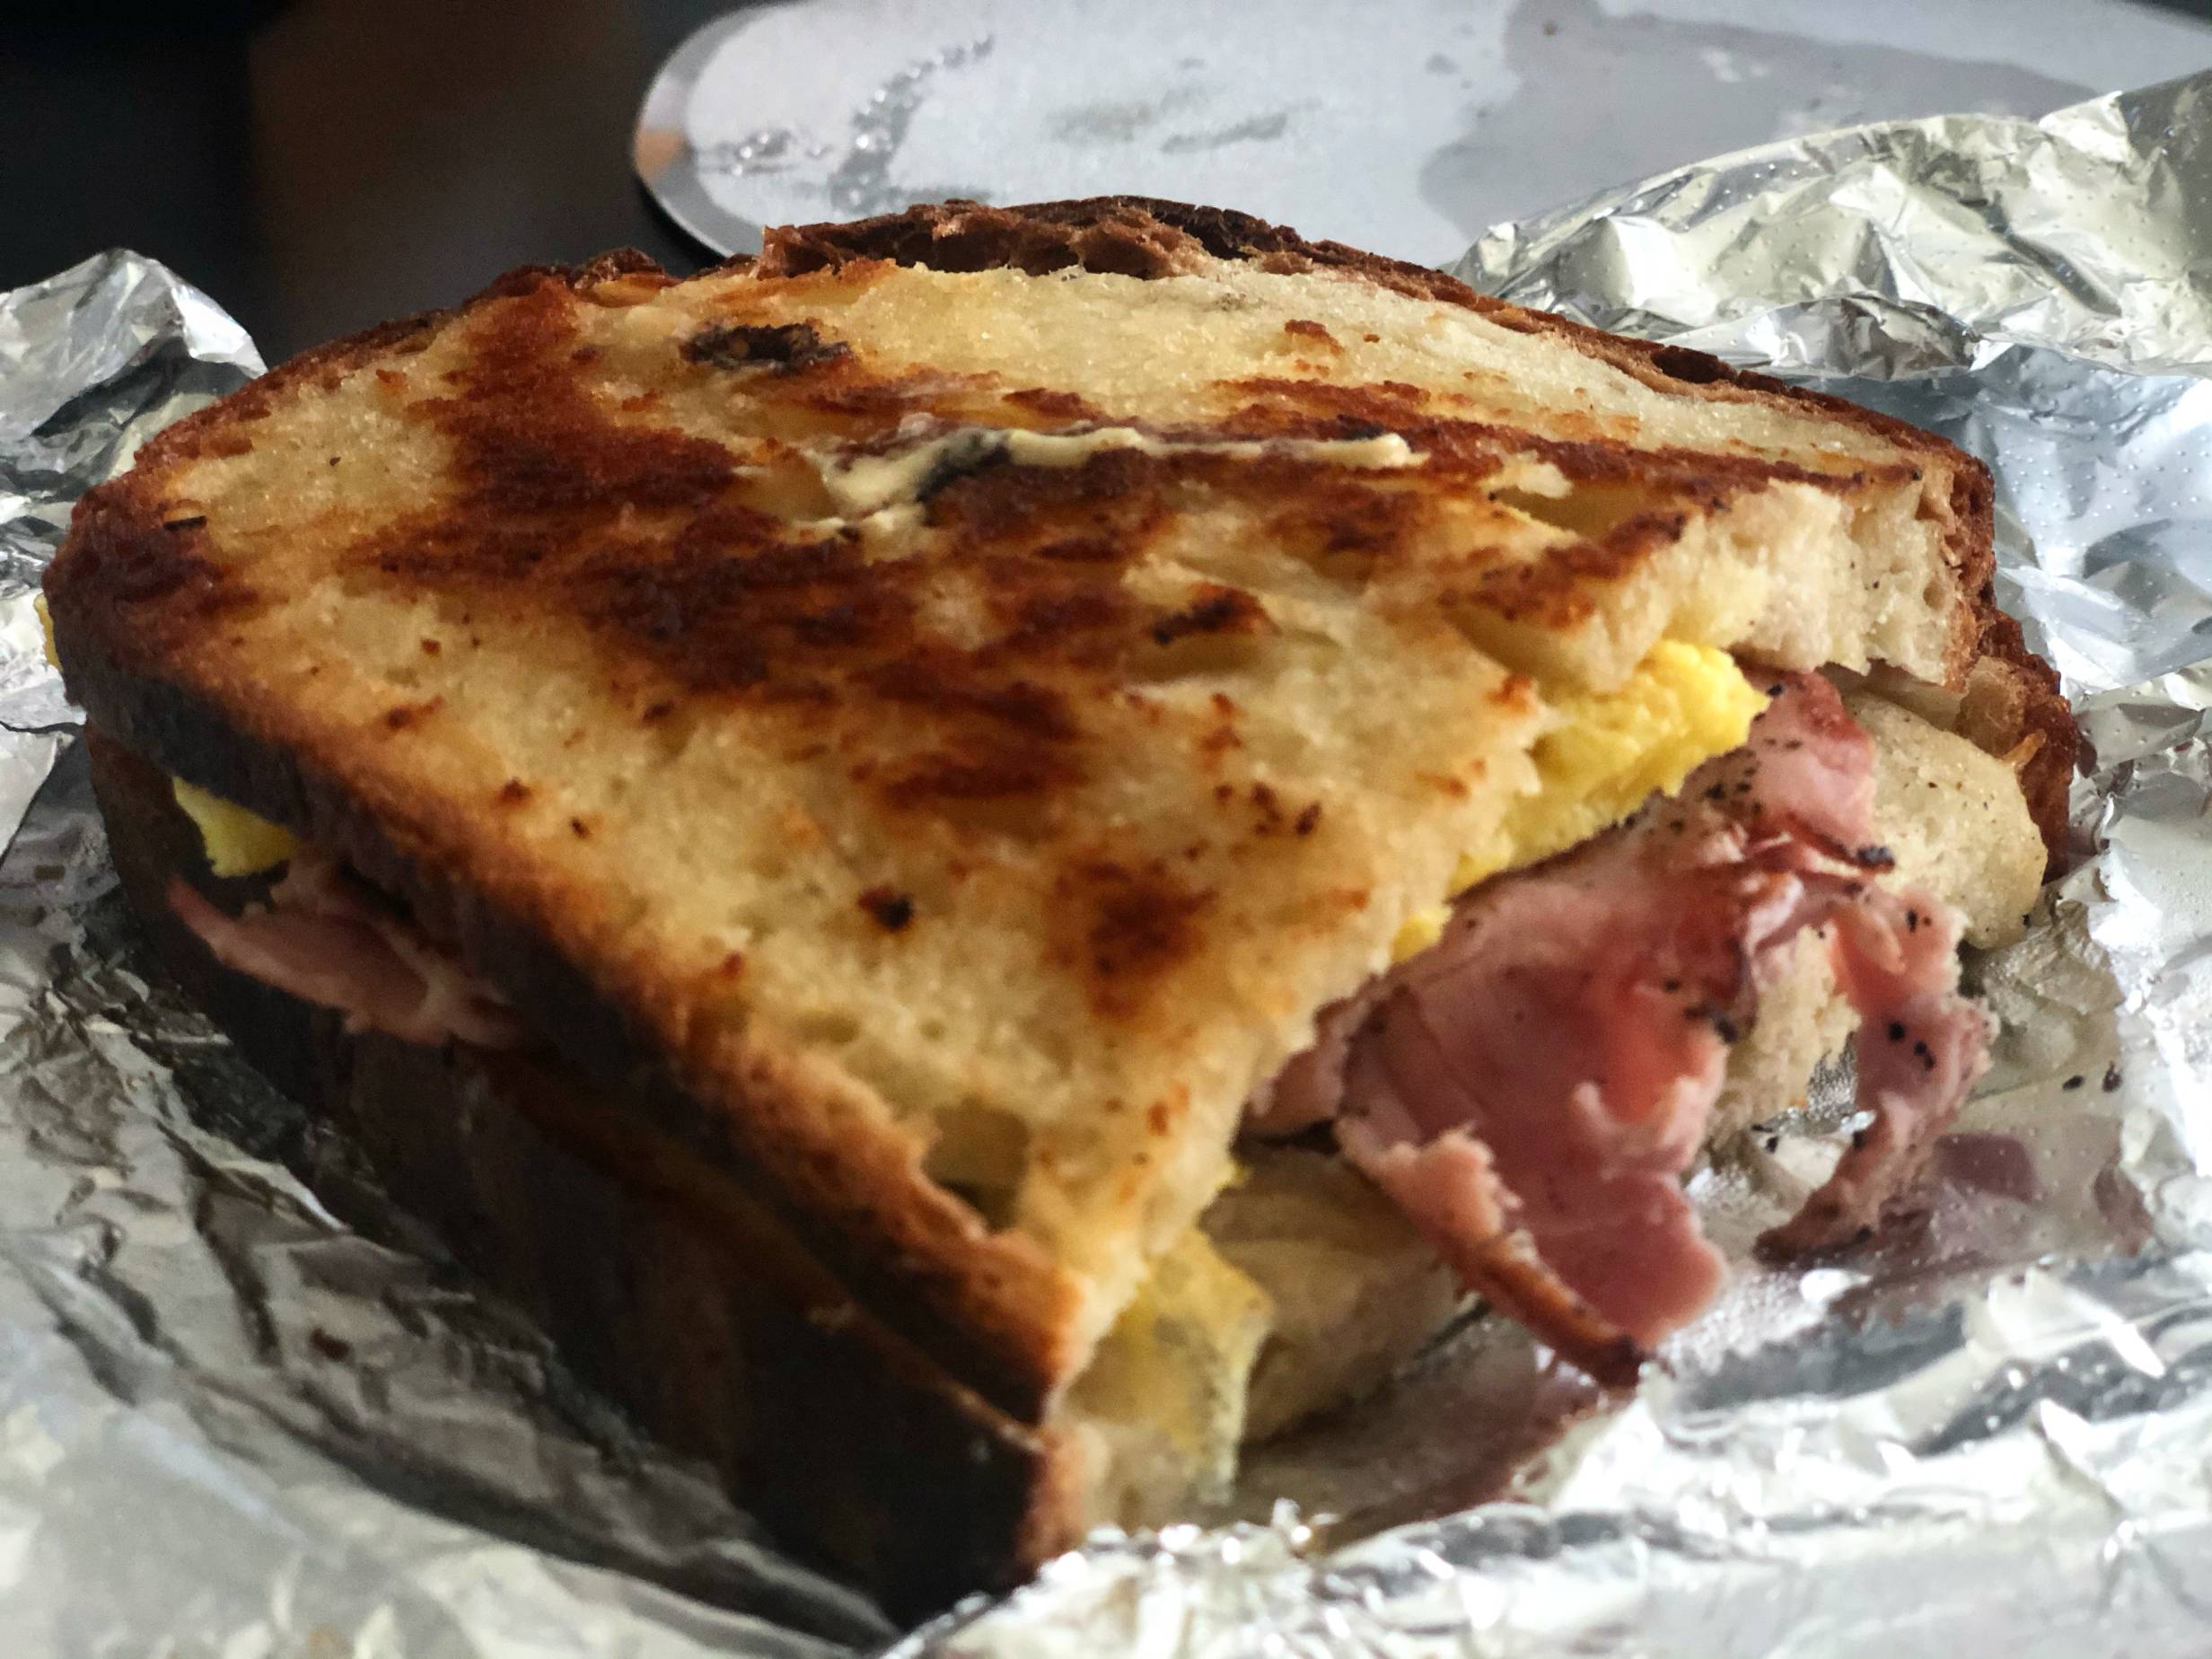 A half sandwich sits on a tin foil wrapper. The bread on the sandwich is toasted and darkened in spots with a bit of ham peeking out of the bread. Photo by Alyssa Buckley.